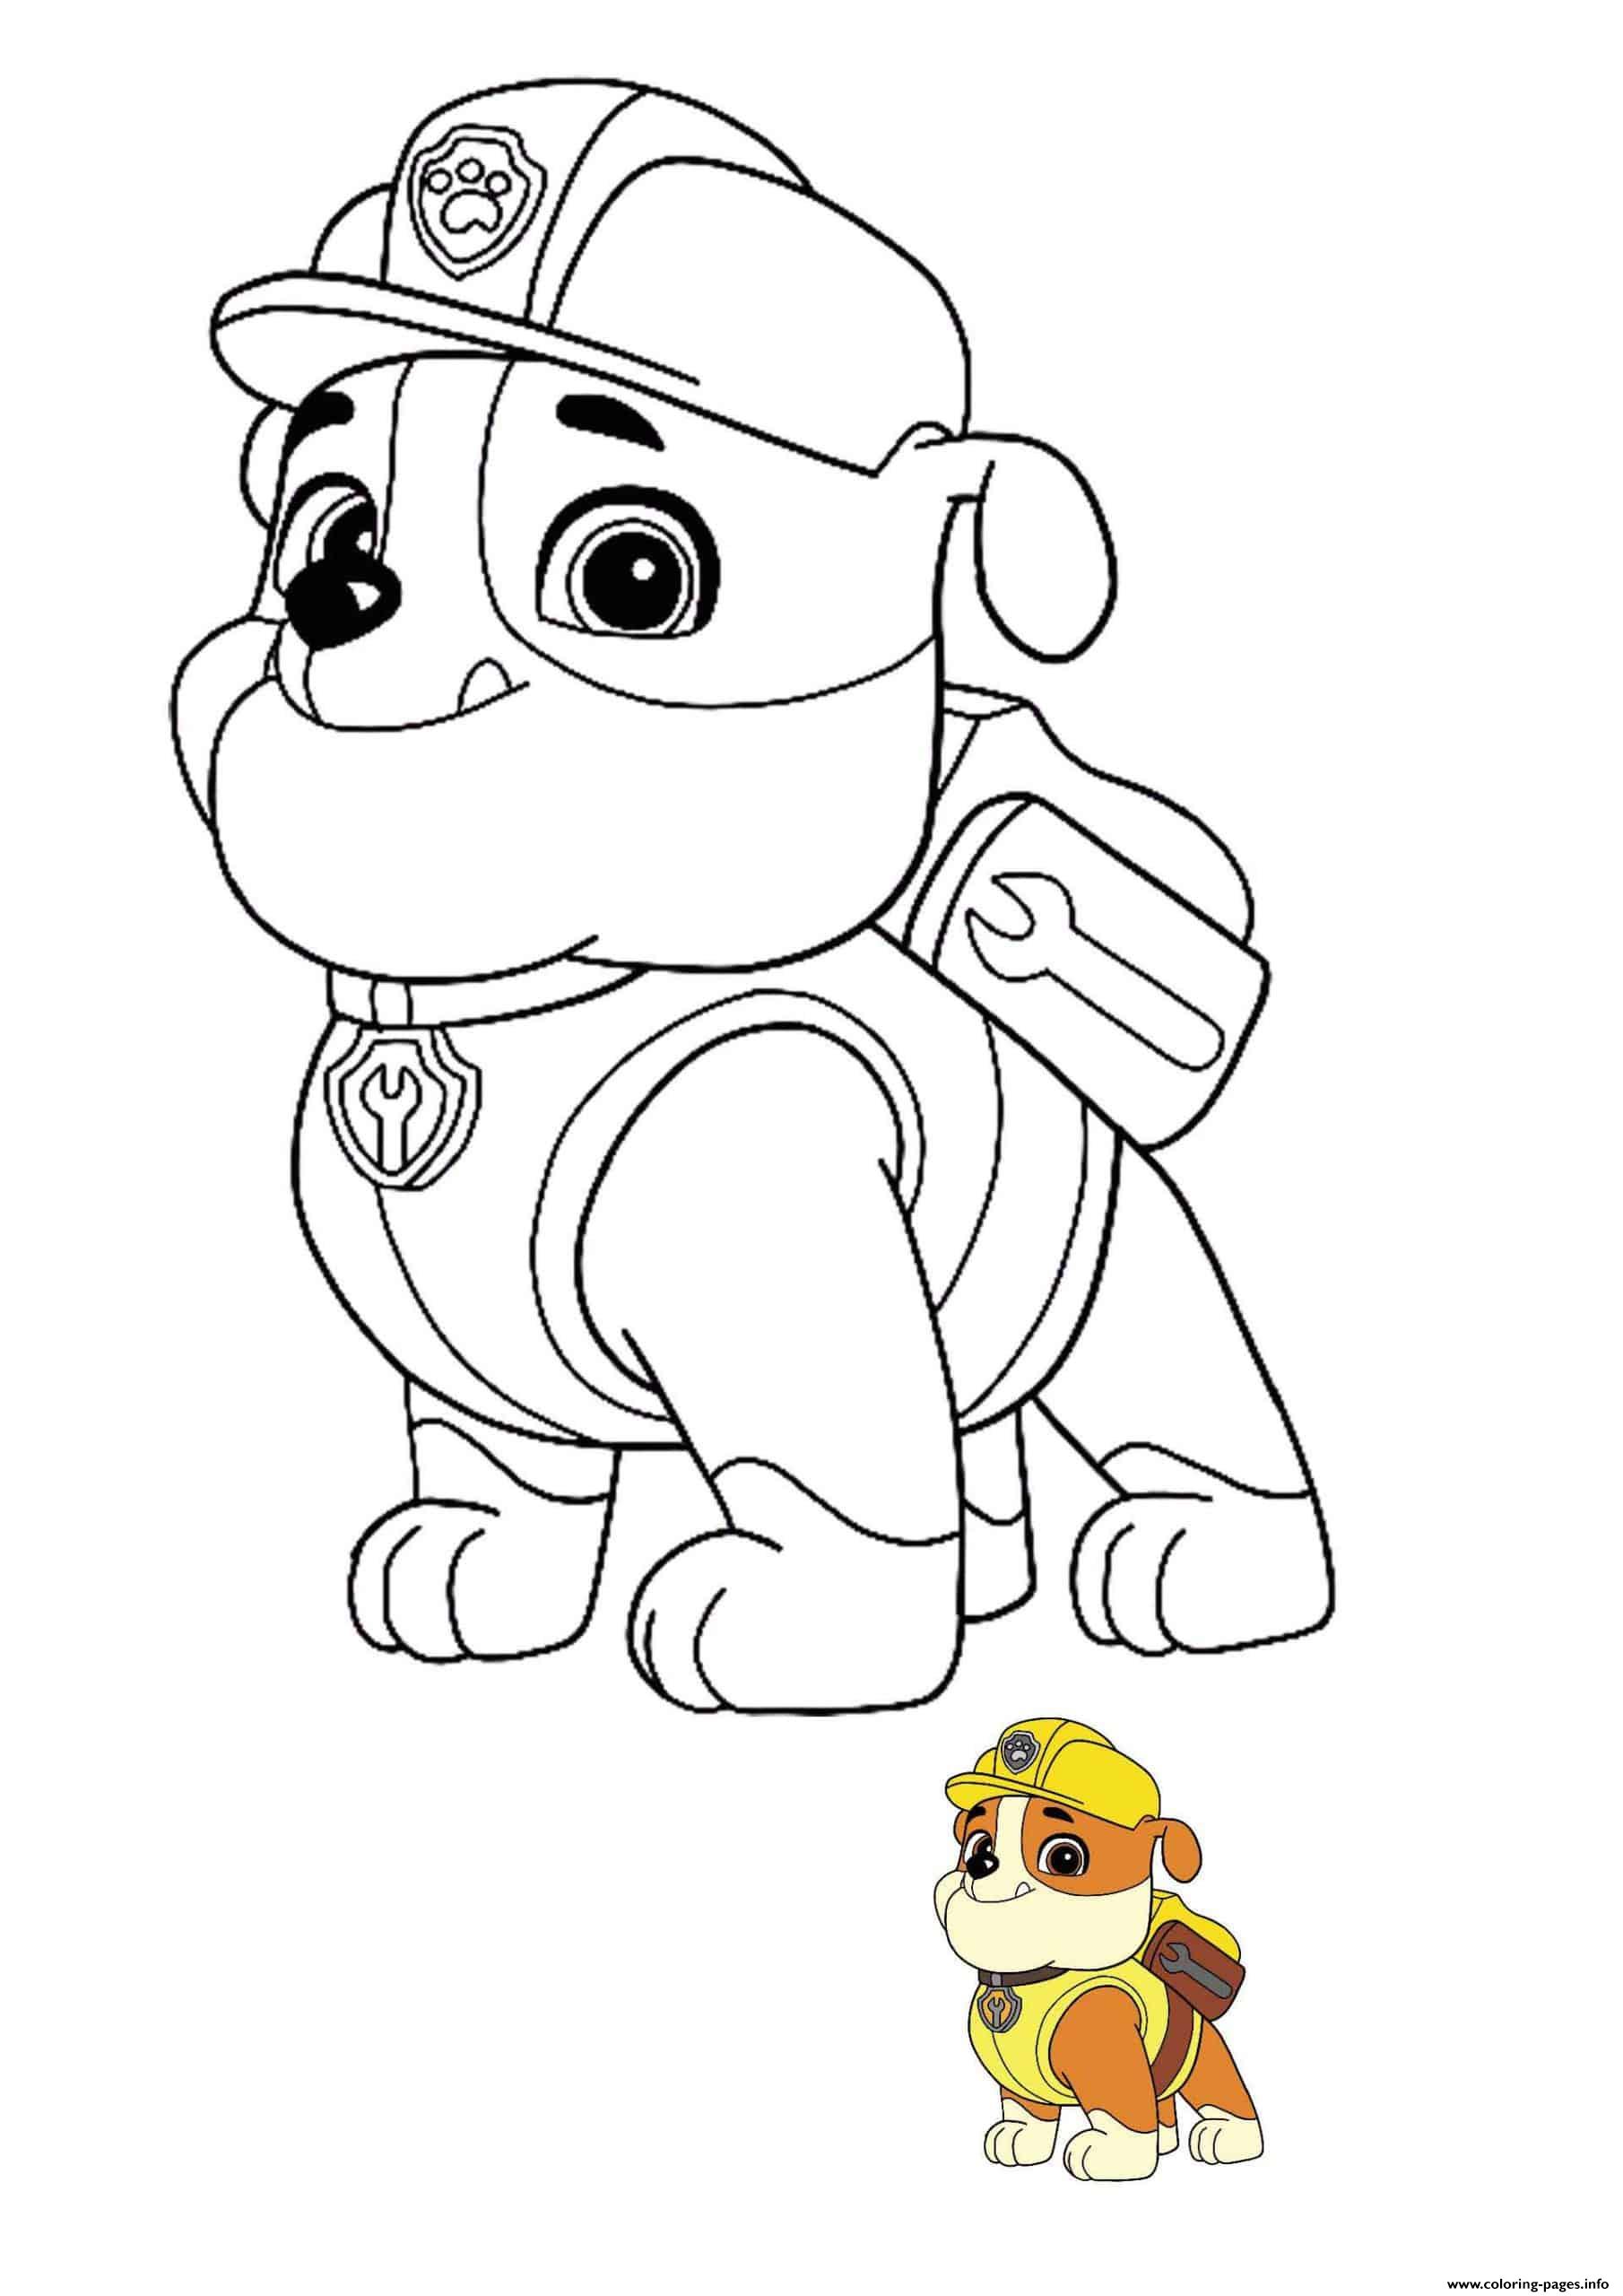 Rubble The Youngest Member Of The Paw Patrol coloring